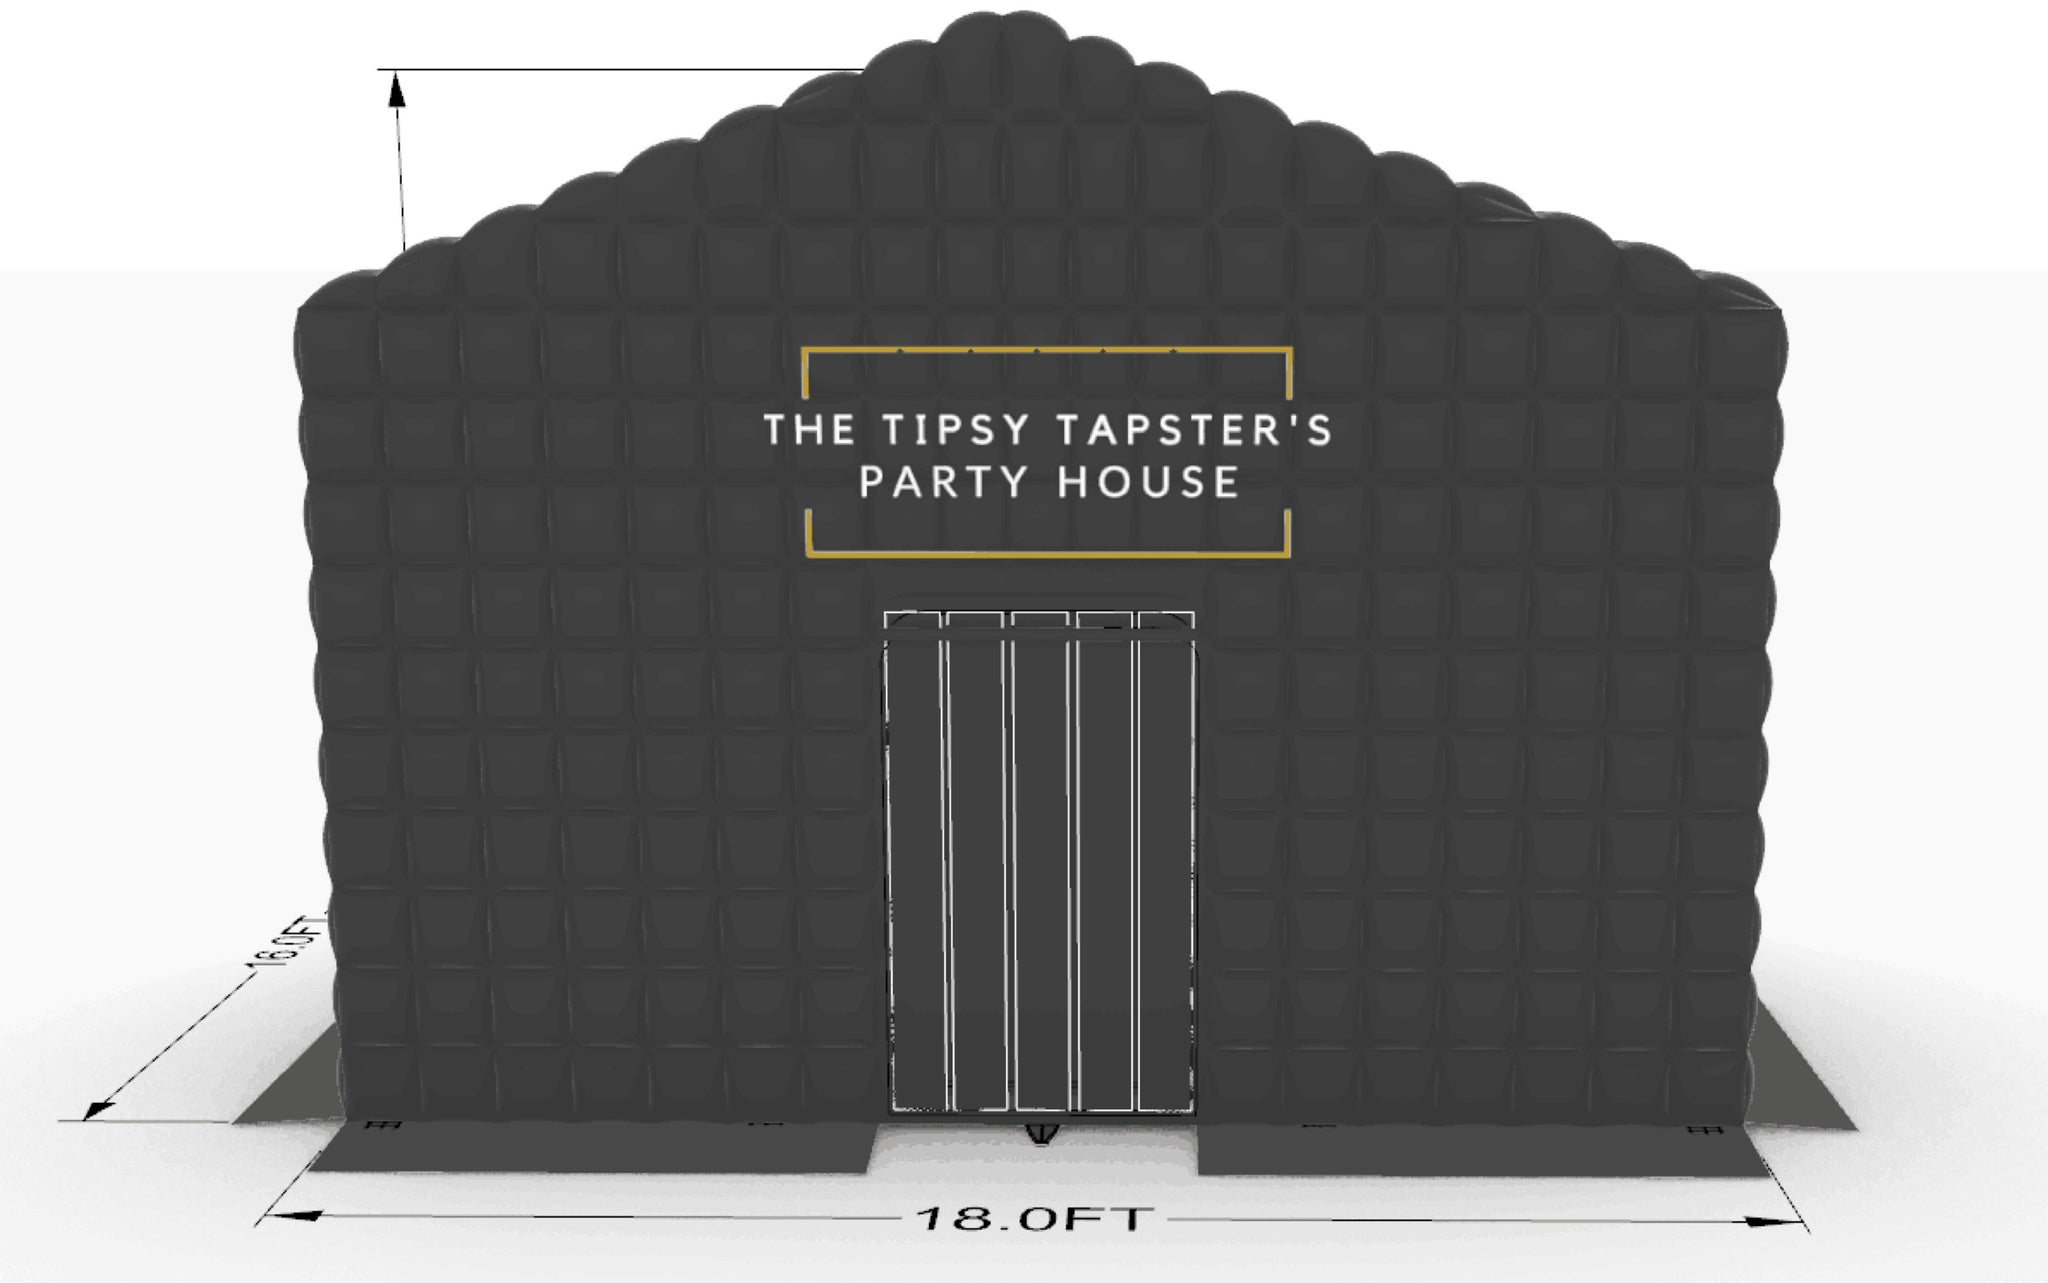 The Tipsy Tapster's Party House